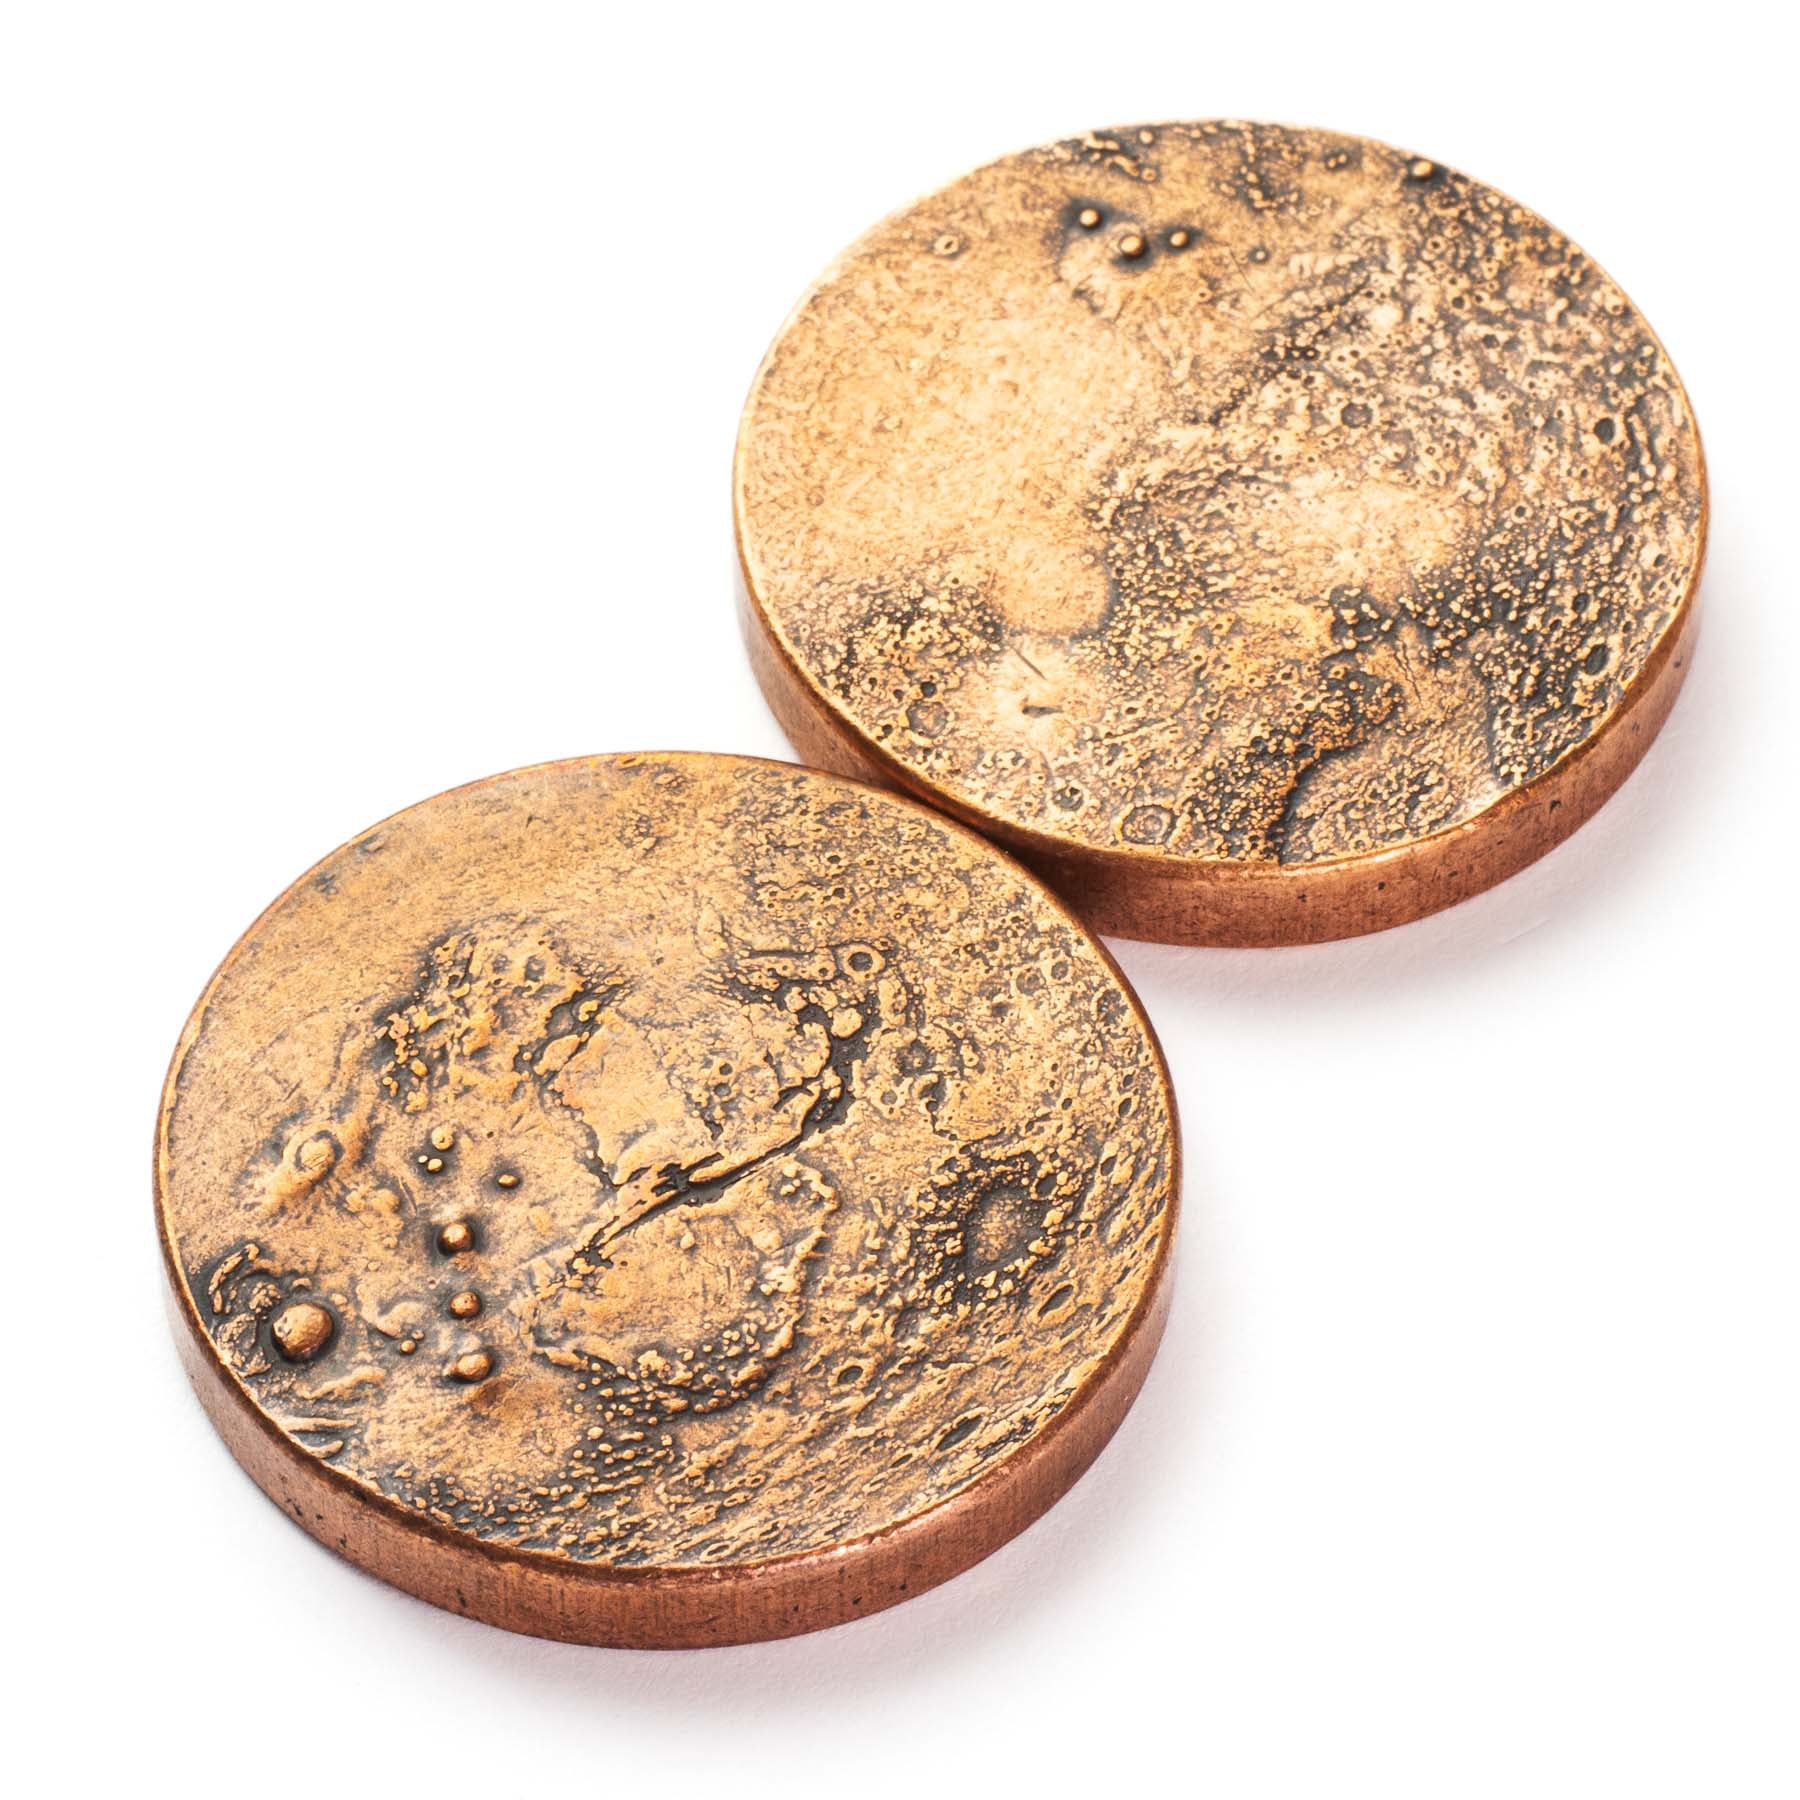 Mars red planet martian worry coin | Shire Post Mint